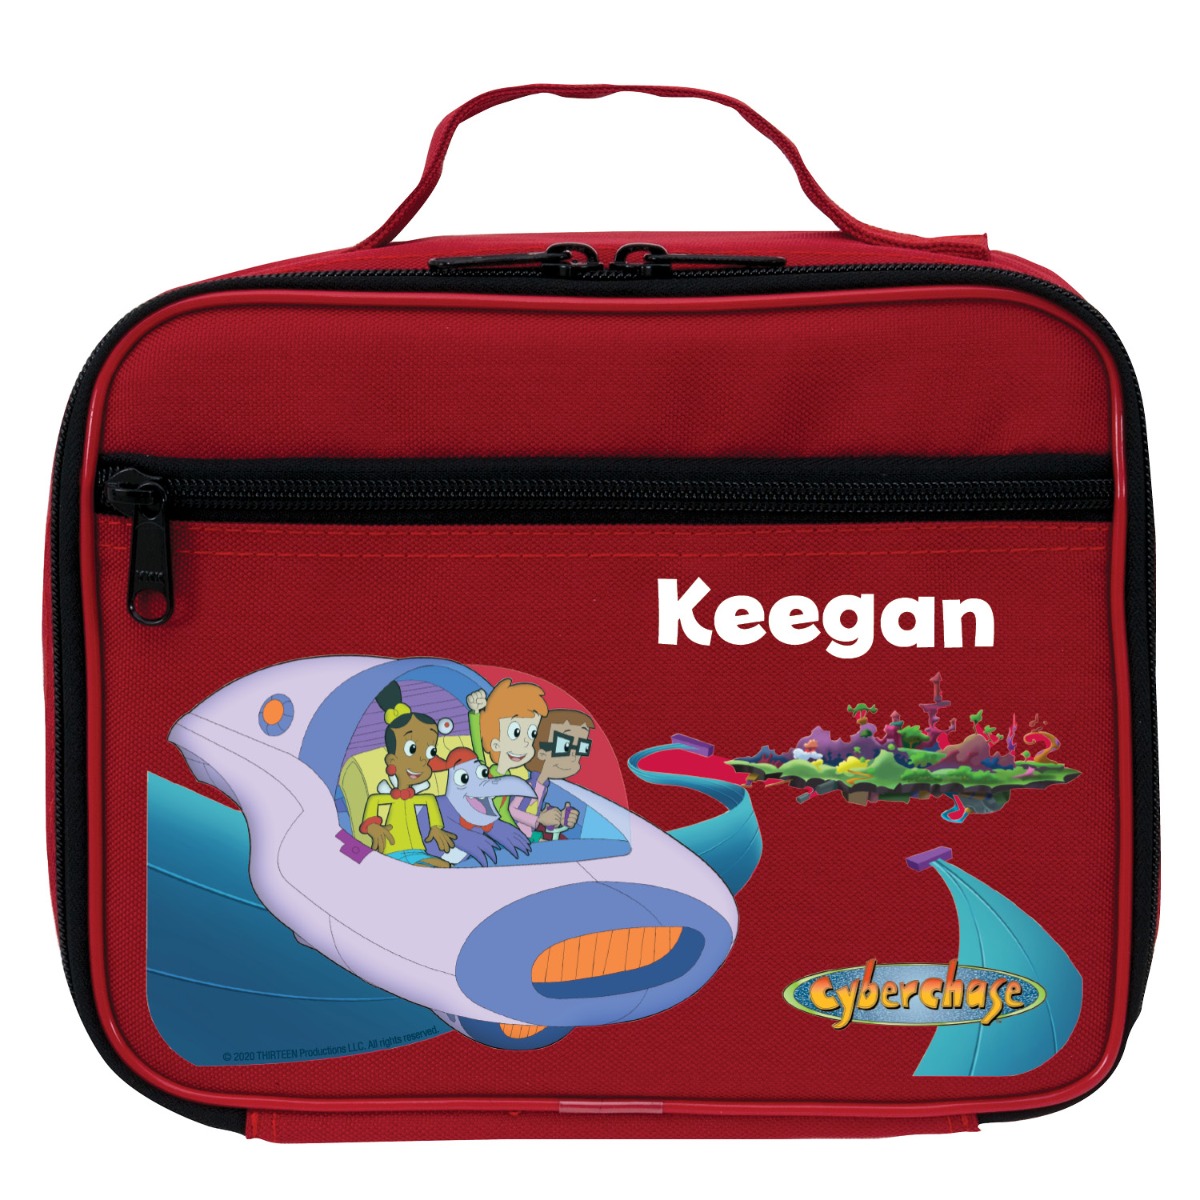 Cyberchase Personalized Red Lunch Bag